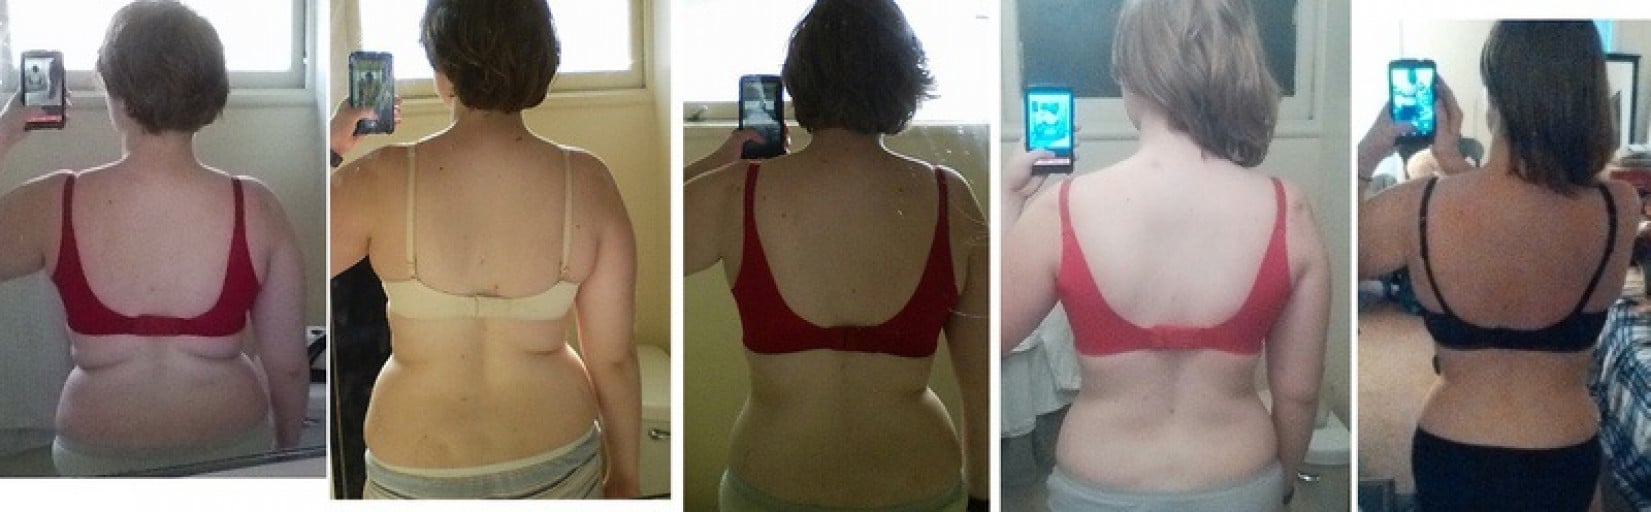 A progress pic of a 5'9" woman showing a weight reduction from 198 pounds to 157 pounds. A total loss of 41 pounds.